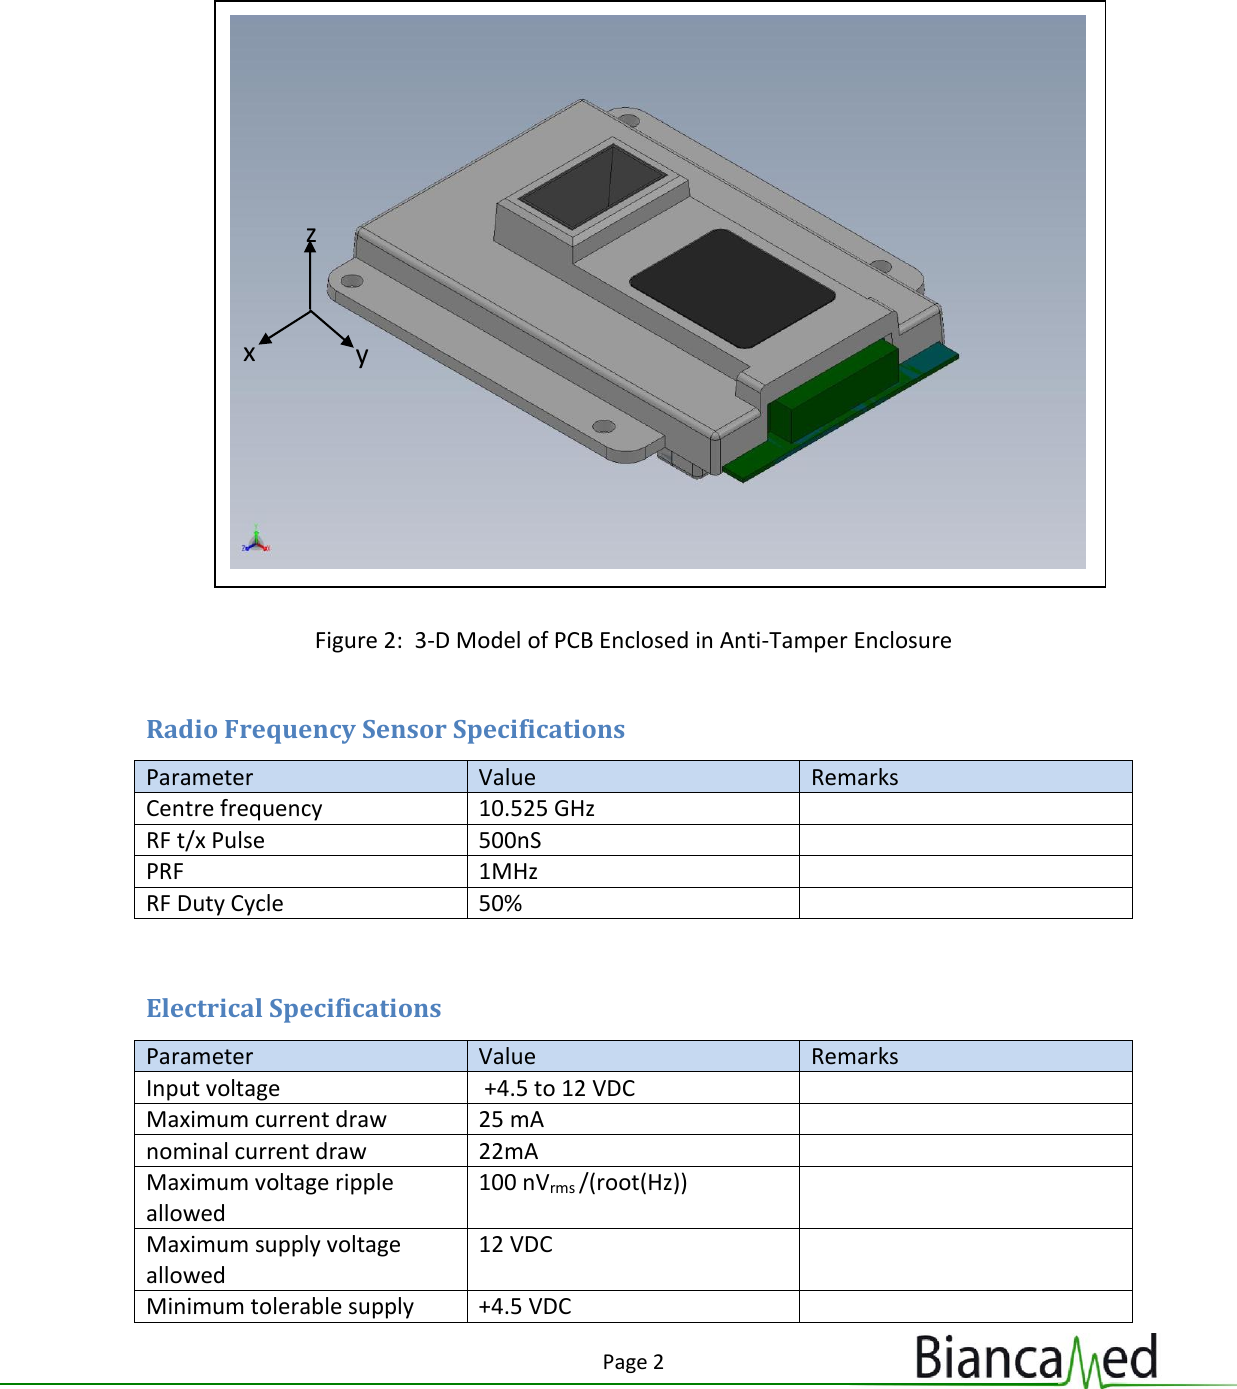 Page 2   Figure 2:  3-D Model of PCB Enclosed in Anti-Tamper Enclosure  Radio Frequency Sensor Specifications Parameter Value Remarks Centre frequency 10.525 GHz  RF t/x Pulse 500nS  PRF 1MHz  RF Duty Cycle 50%   Electrical Specifications Parameter Value Remarks Input voltage  +4.5 to 12 VDC  Maximum current draw 25 mA  nominal current draw 22mA  Maximum voltage ripple allowed 100 nVrms /(root(Hz))  Maximum supply voltage allowed 12 VDC  Minimum tolerable supply +4.5 VDC   x y z 